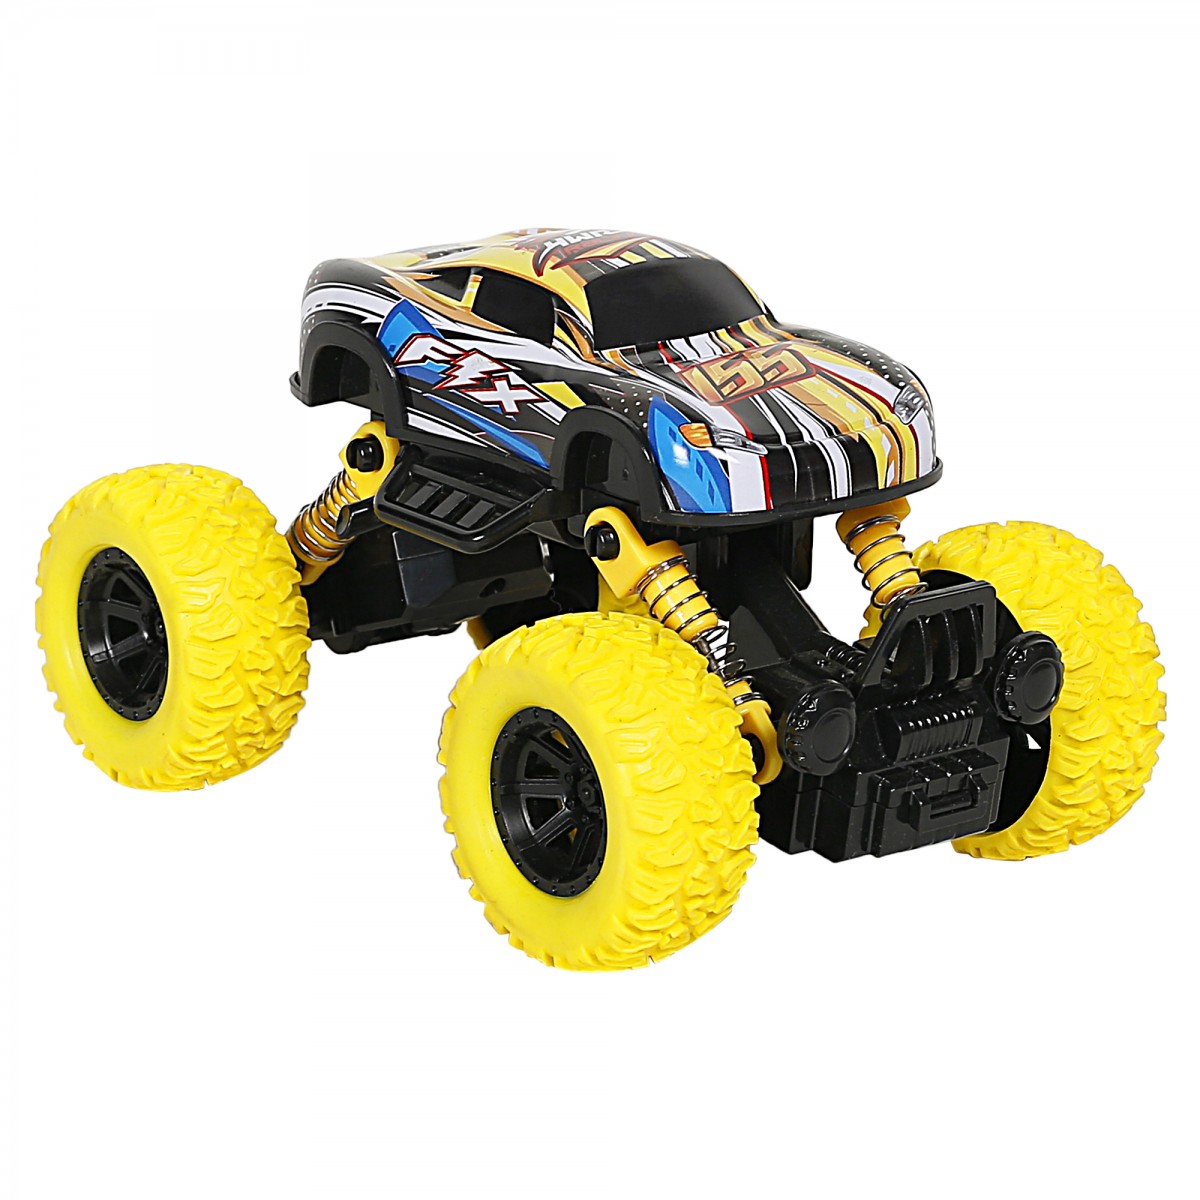 Ralleyz Pull Back Monster Car for Kids, 3Y+, Yellow